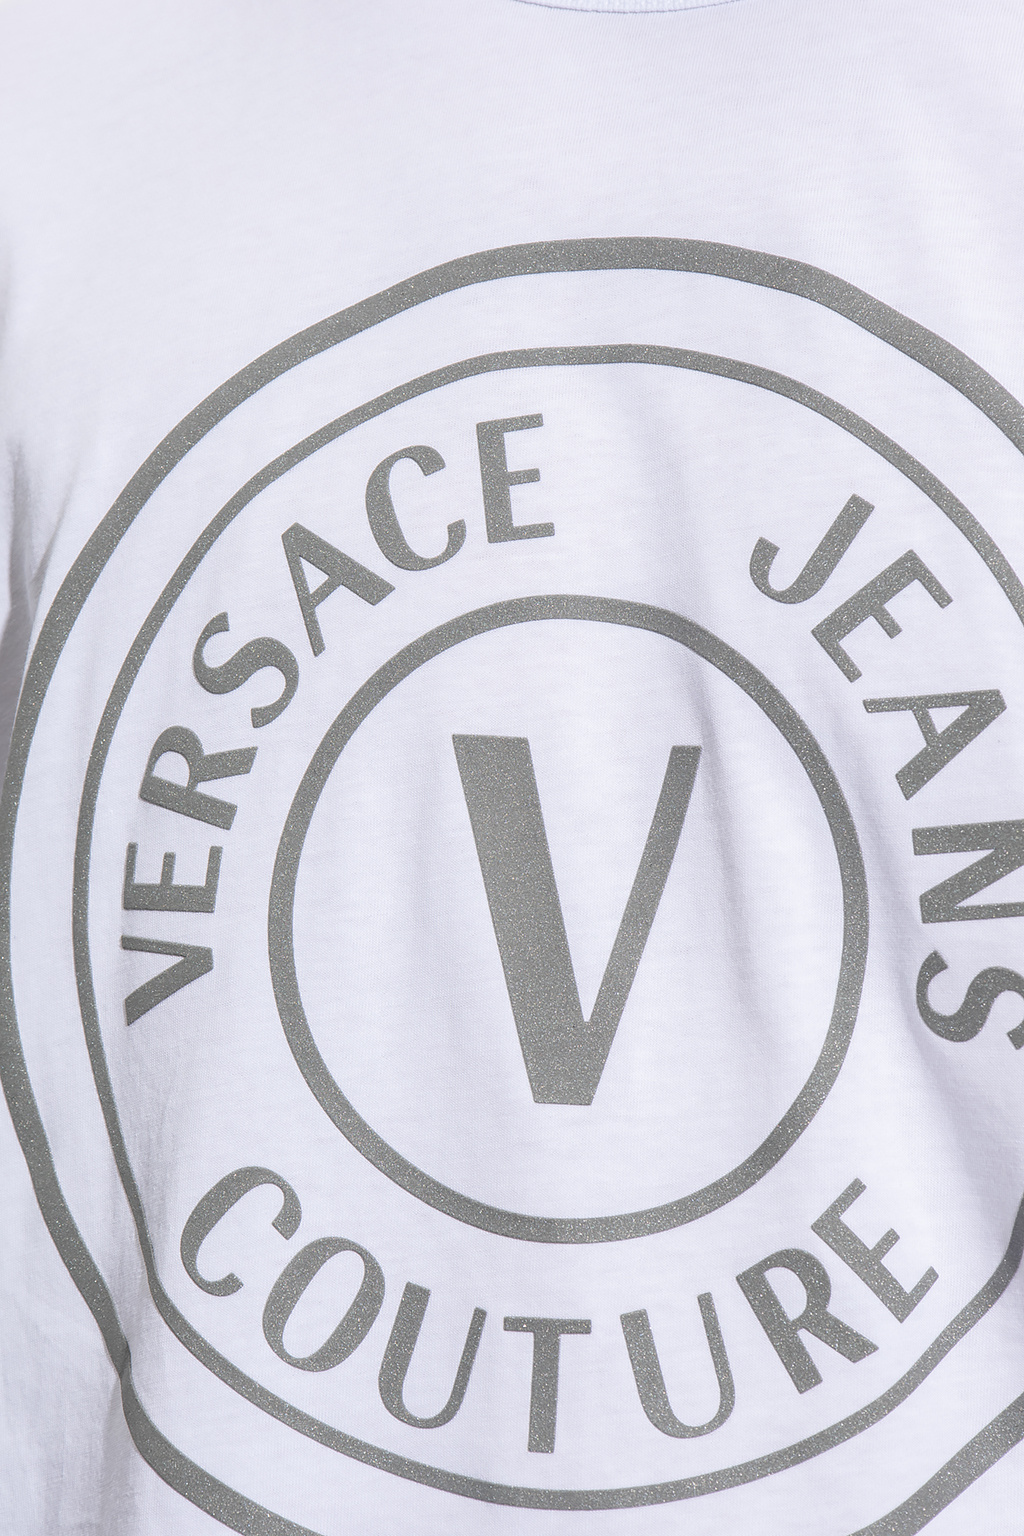 Versace Jeans Couture Logo T-shirt